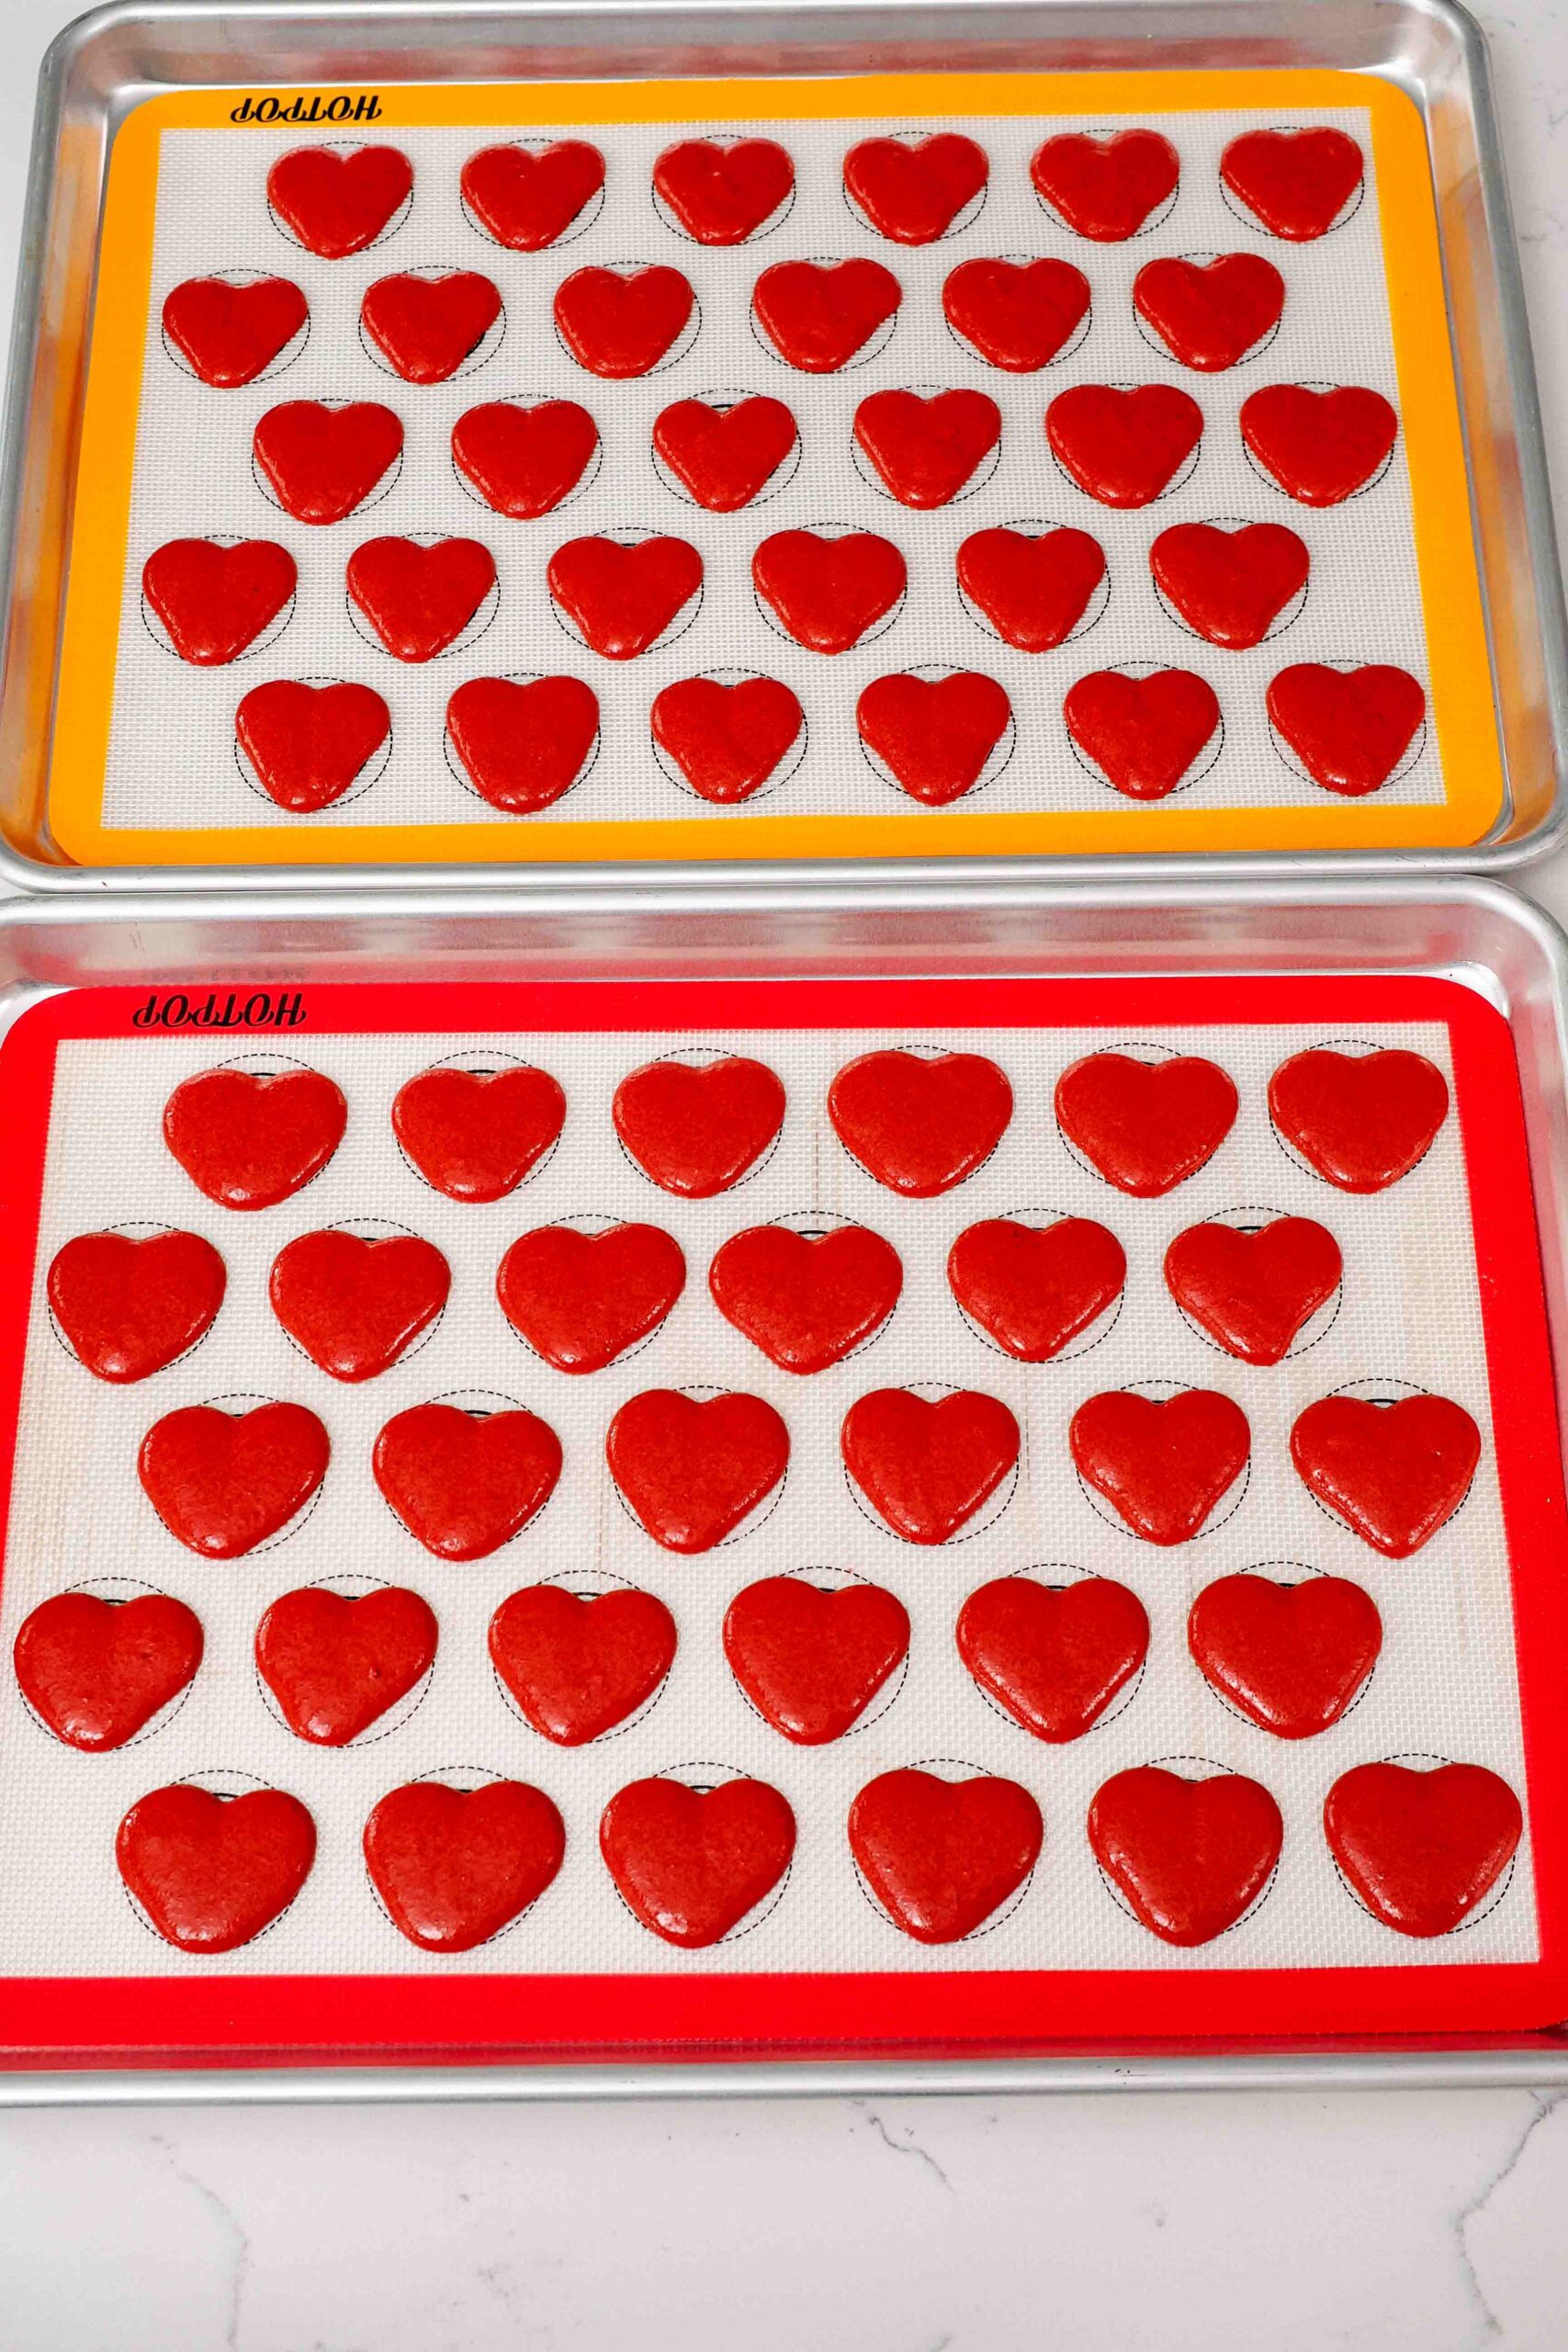 Freshly piped heart macarons on silicone macaron mats.